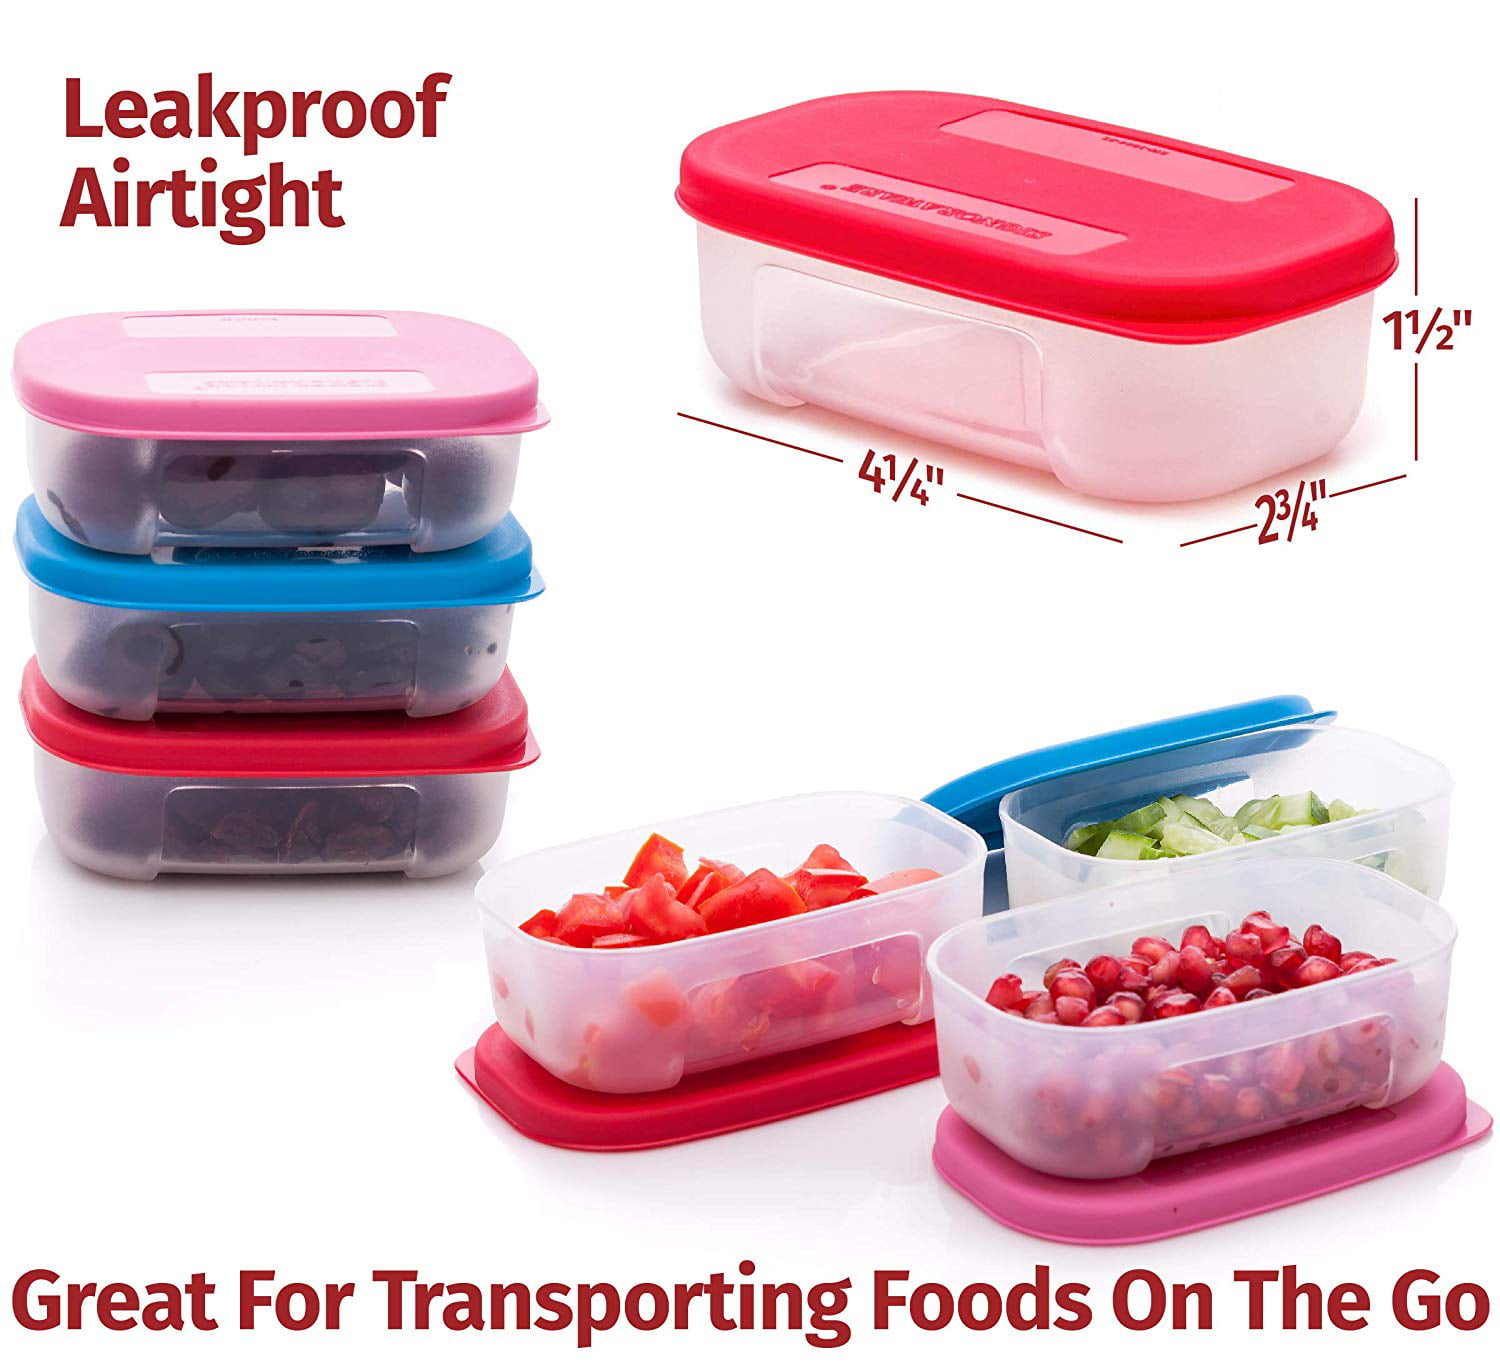 6 Pc Small Food Storage Container Meal Prep Freezer Microwave